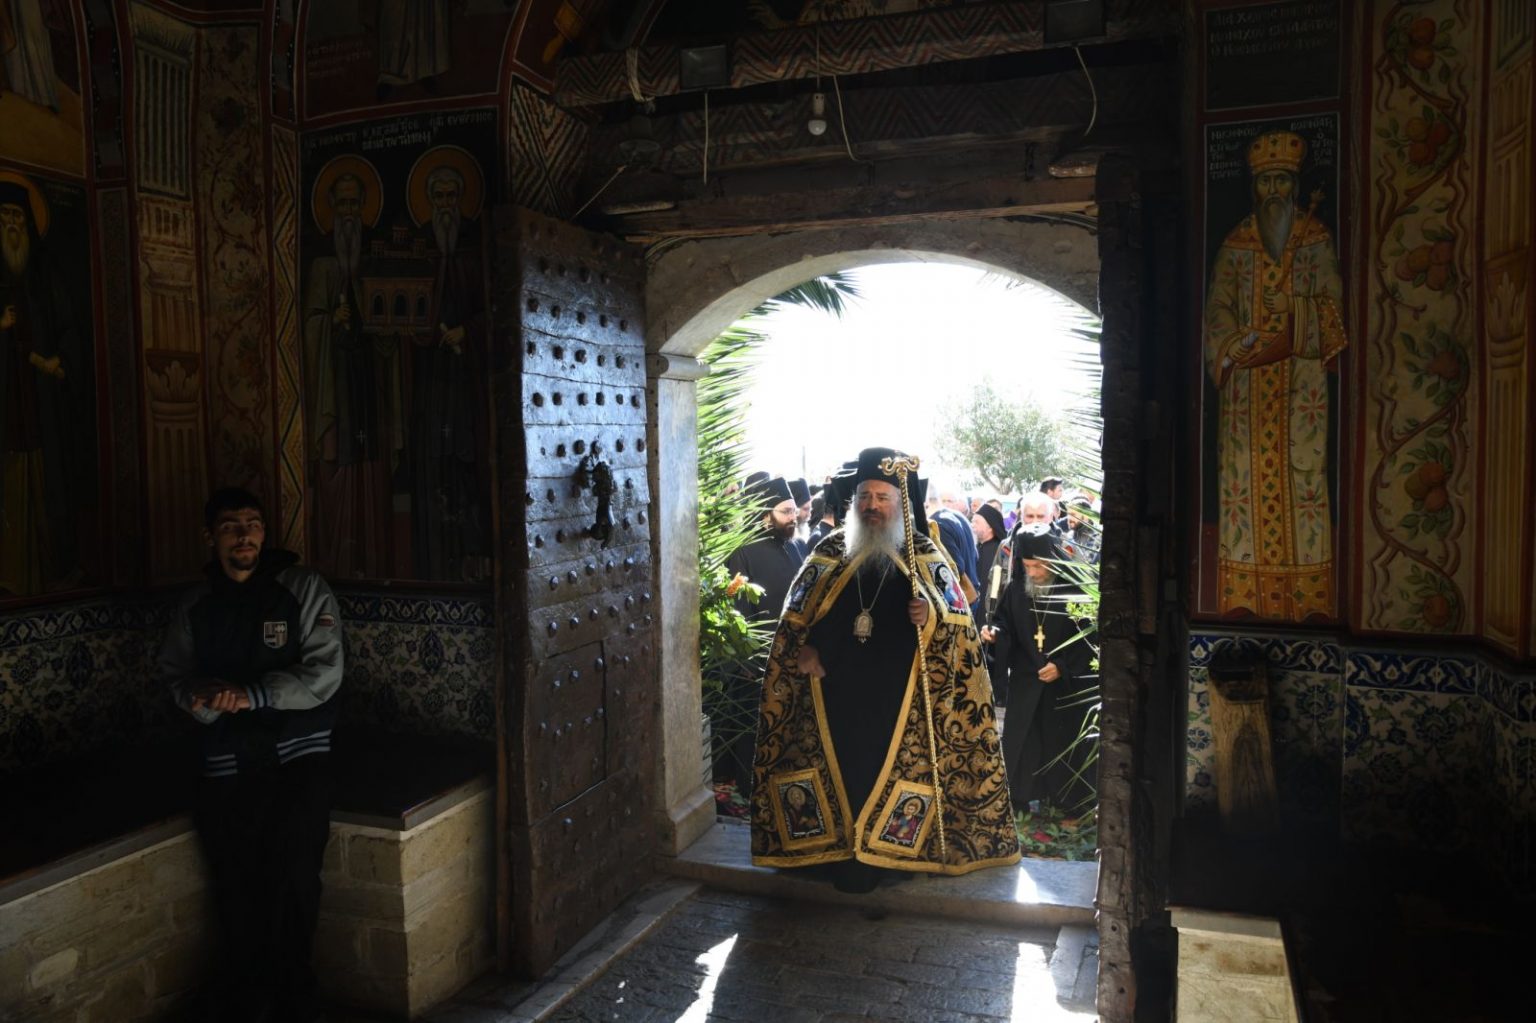 Feast Day of the Holy Docheiariou Monastery of Mount Athos